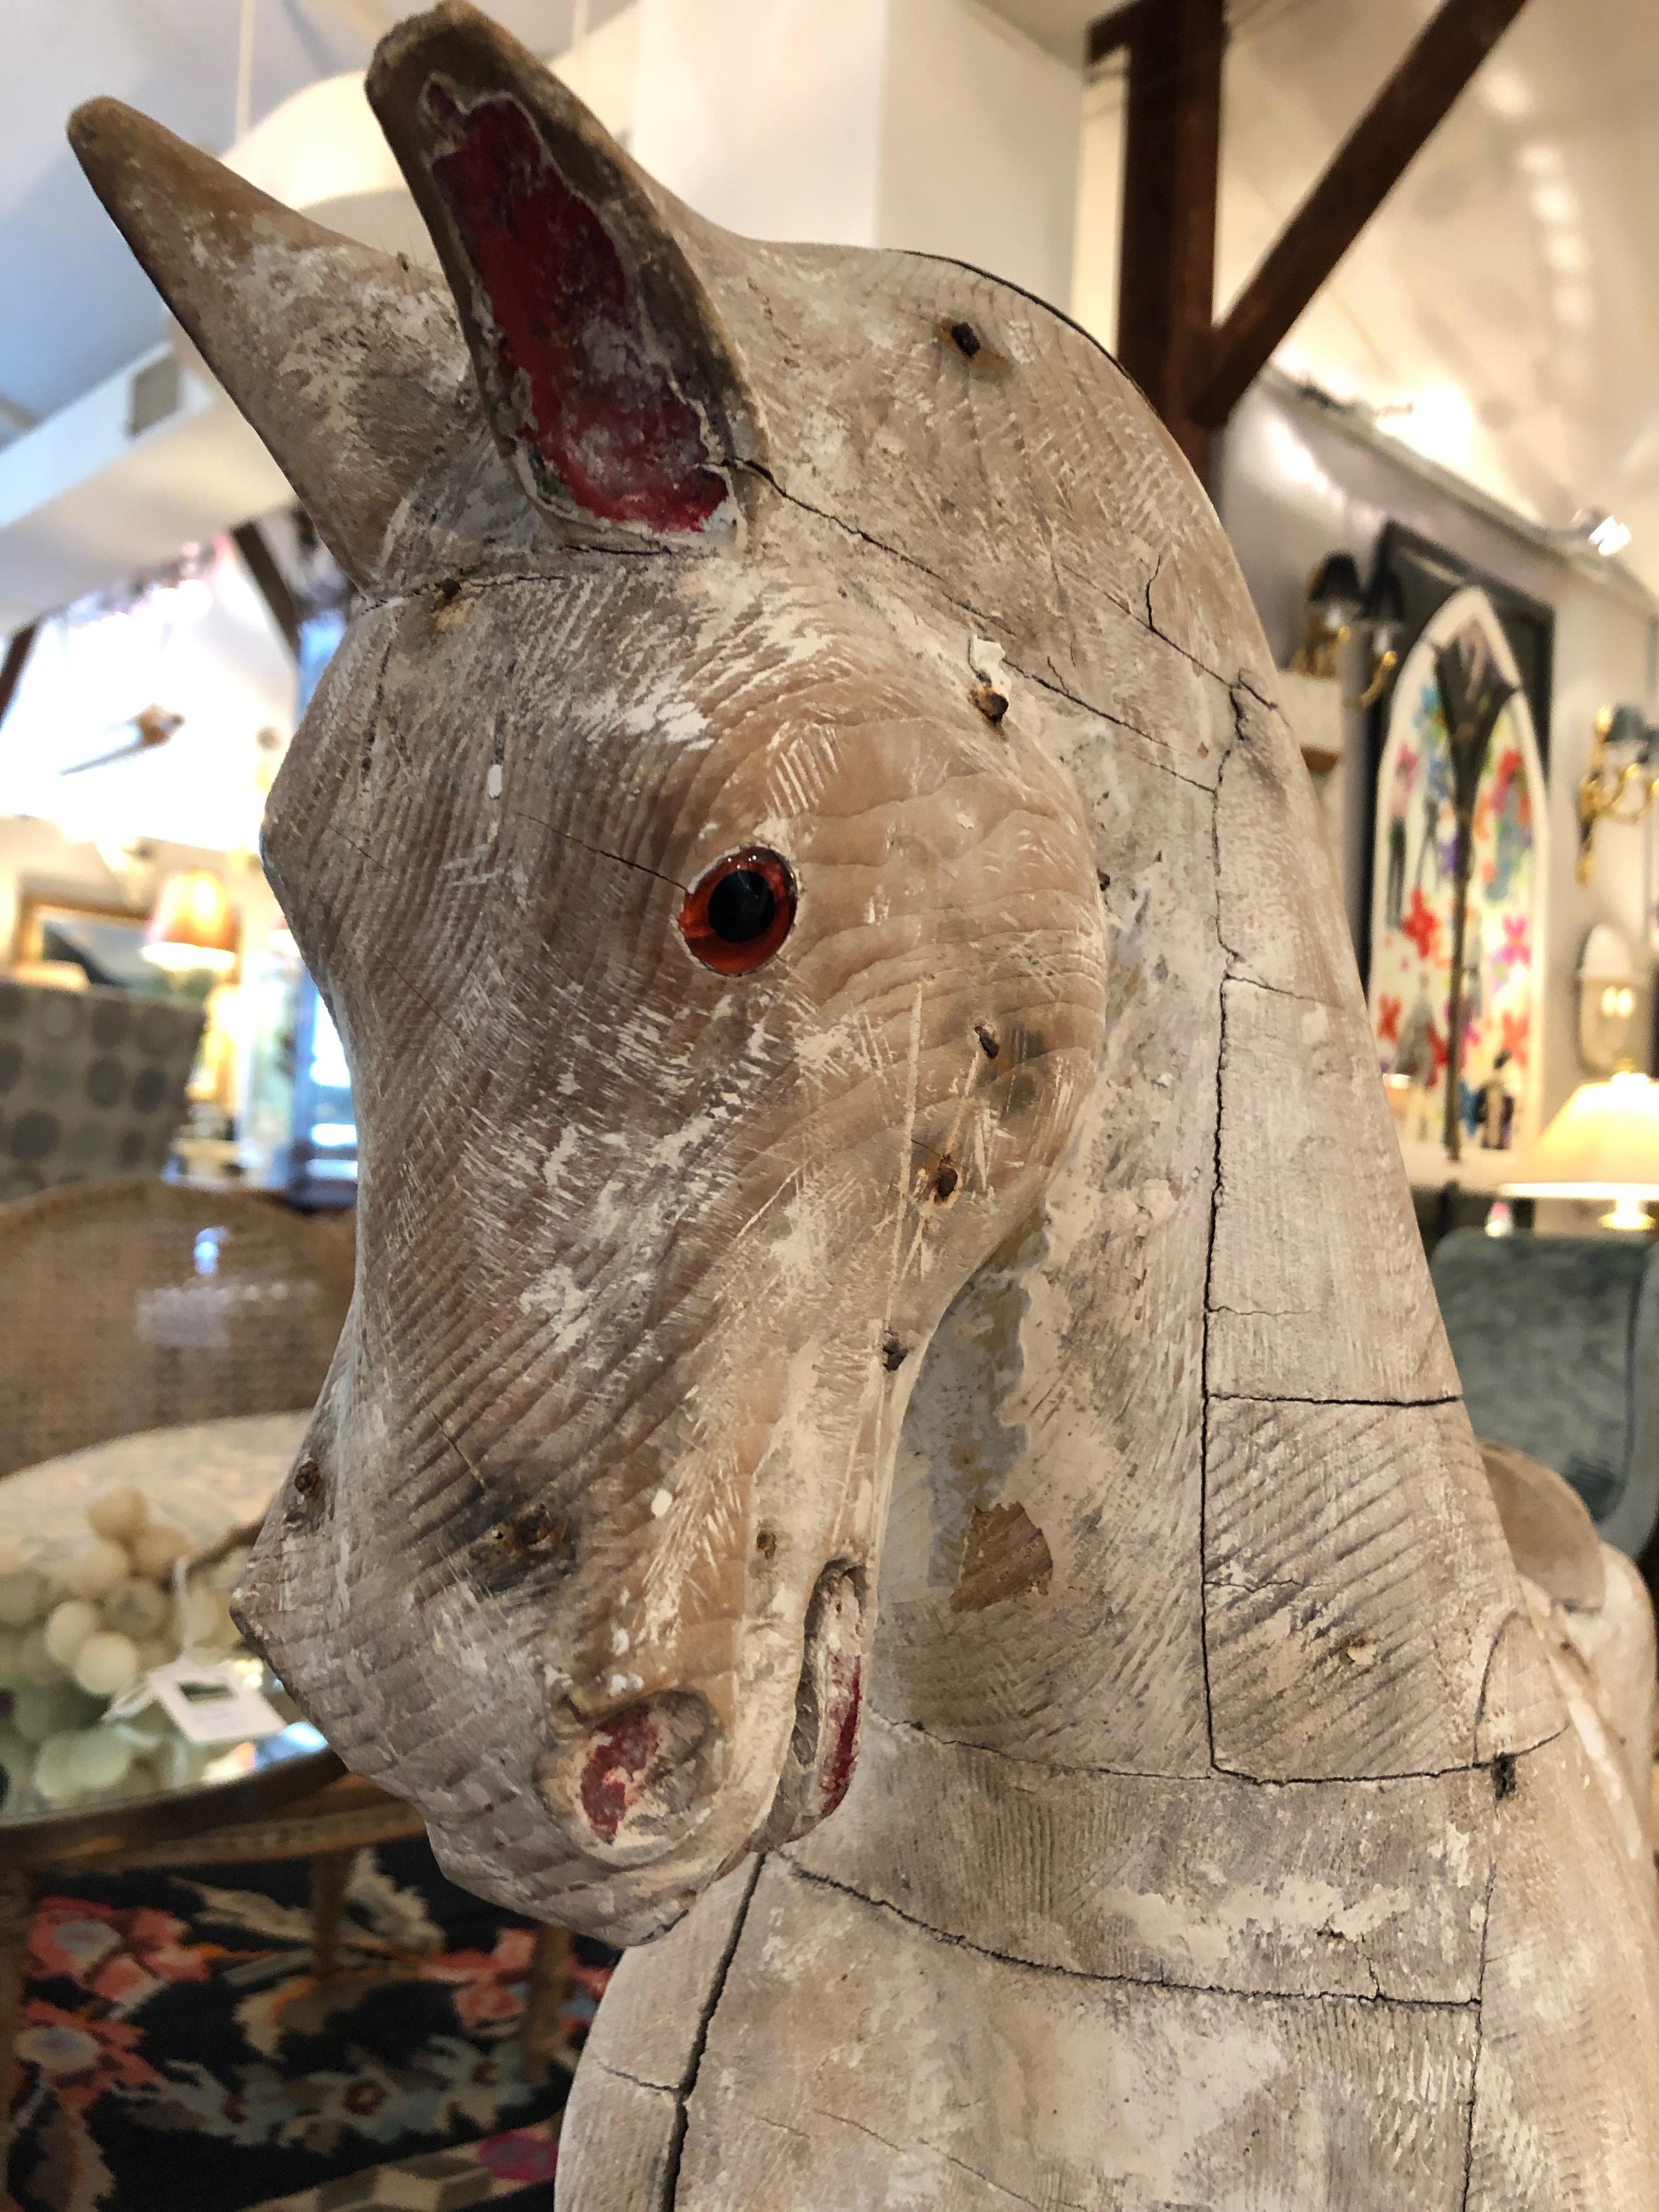 A wonderful hand carved children's hobby horse with original paint and distressed white washed patina. The eyes are amber glass and the base is natural wood. So beautiful, this is a work of folk art and an impressive decorative accessory.